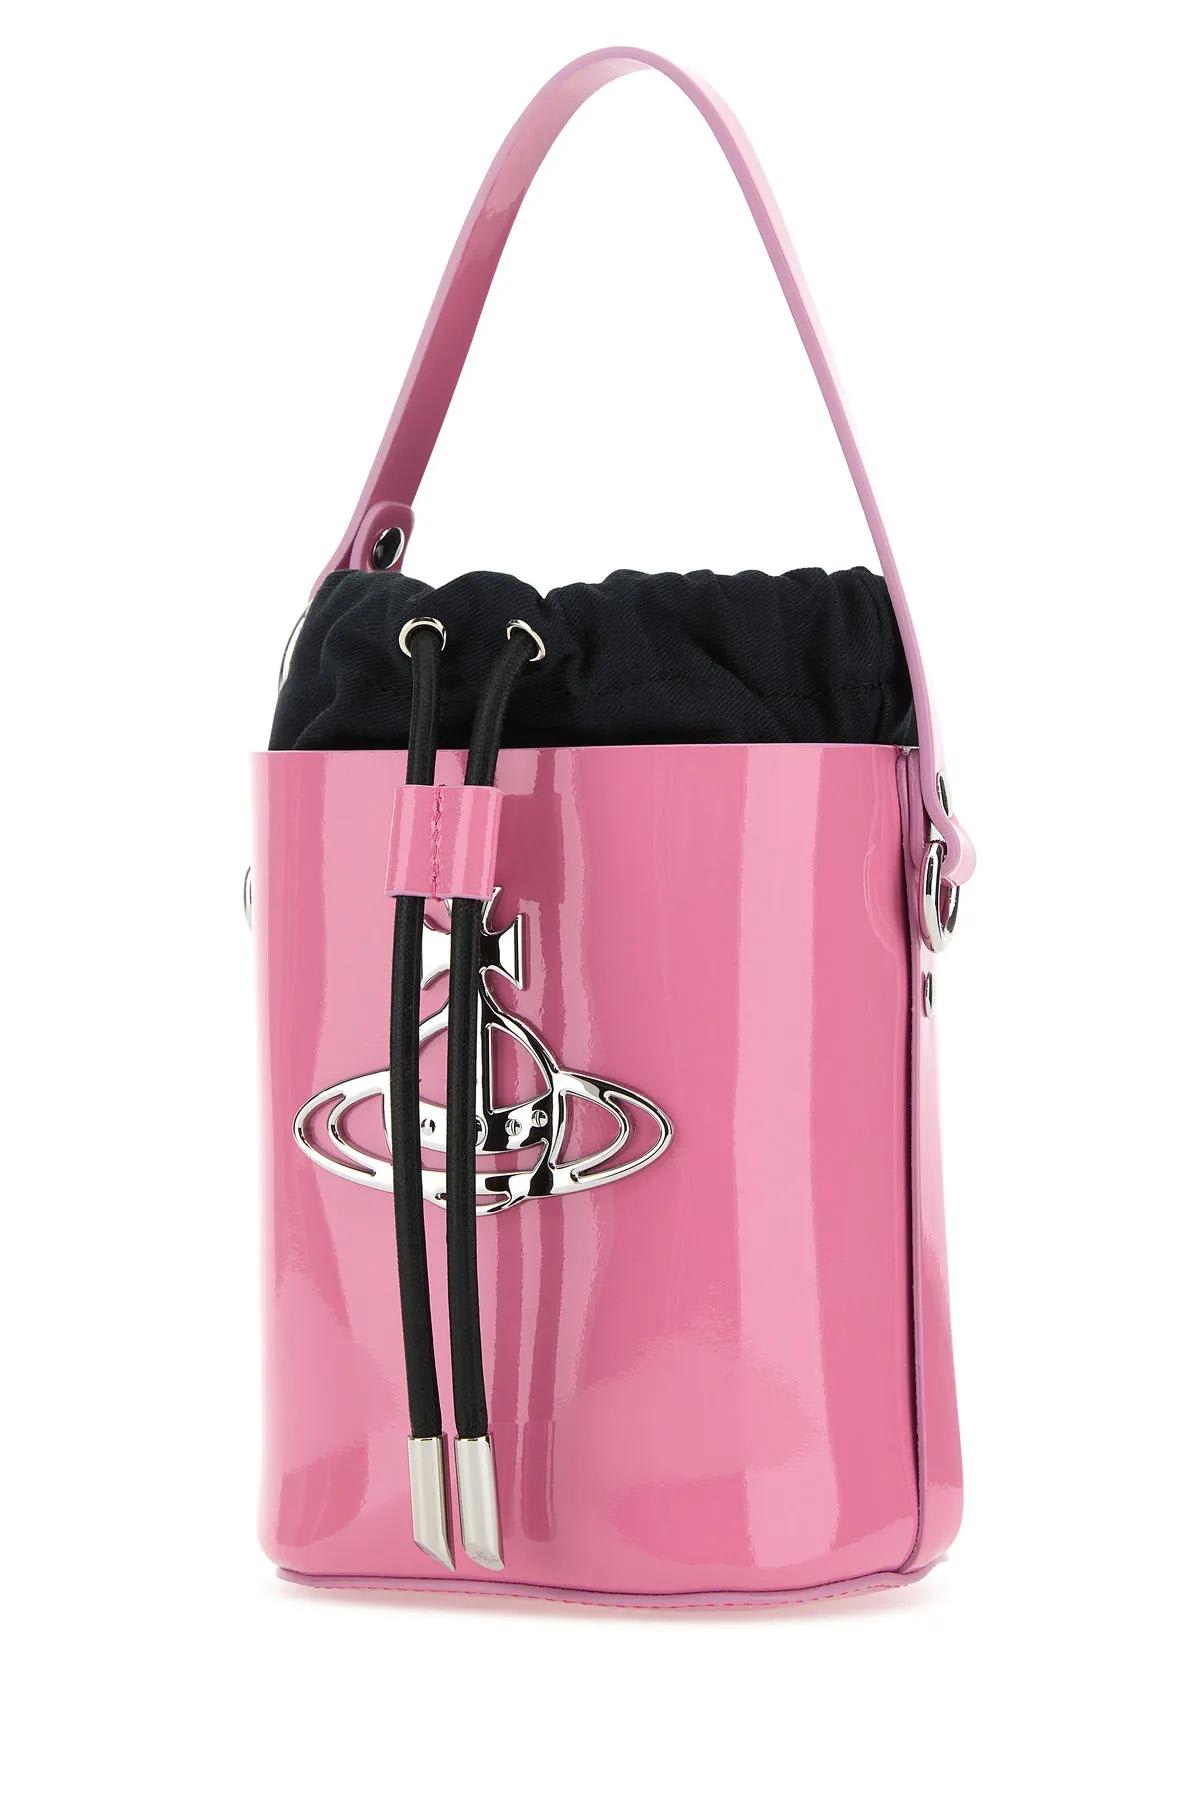 Shop Vivienne Westwood Pink Leather Small Daisy Bucket Bag